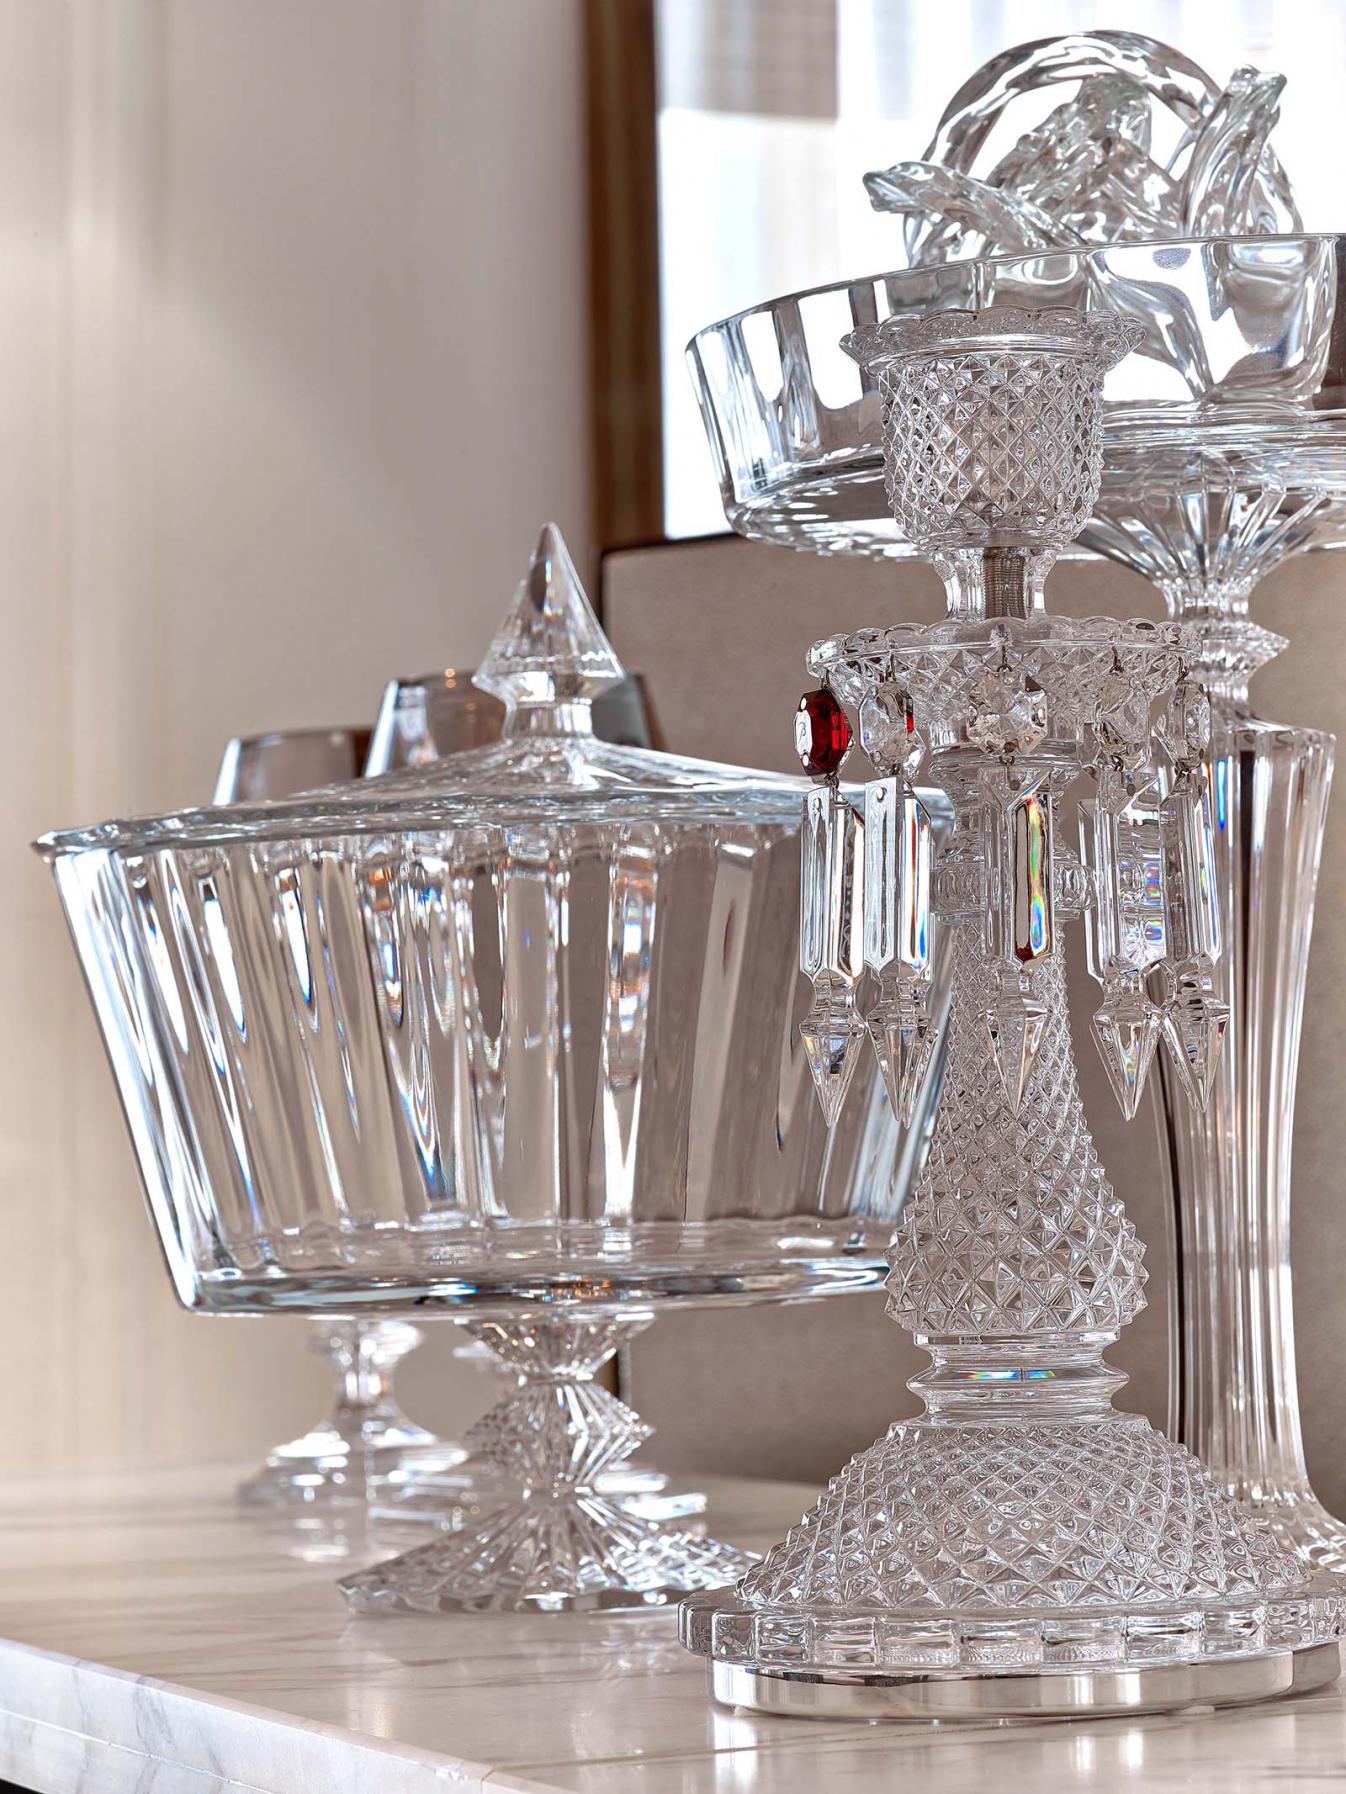 Close up image of Baccarat assorted crystal ware